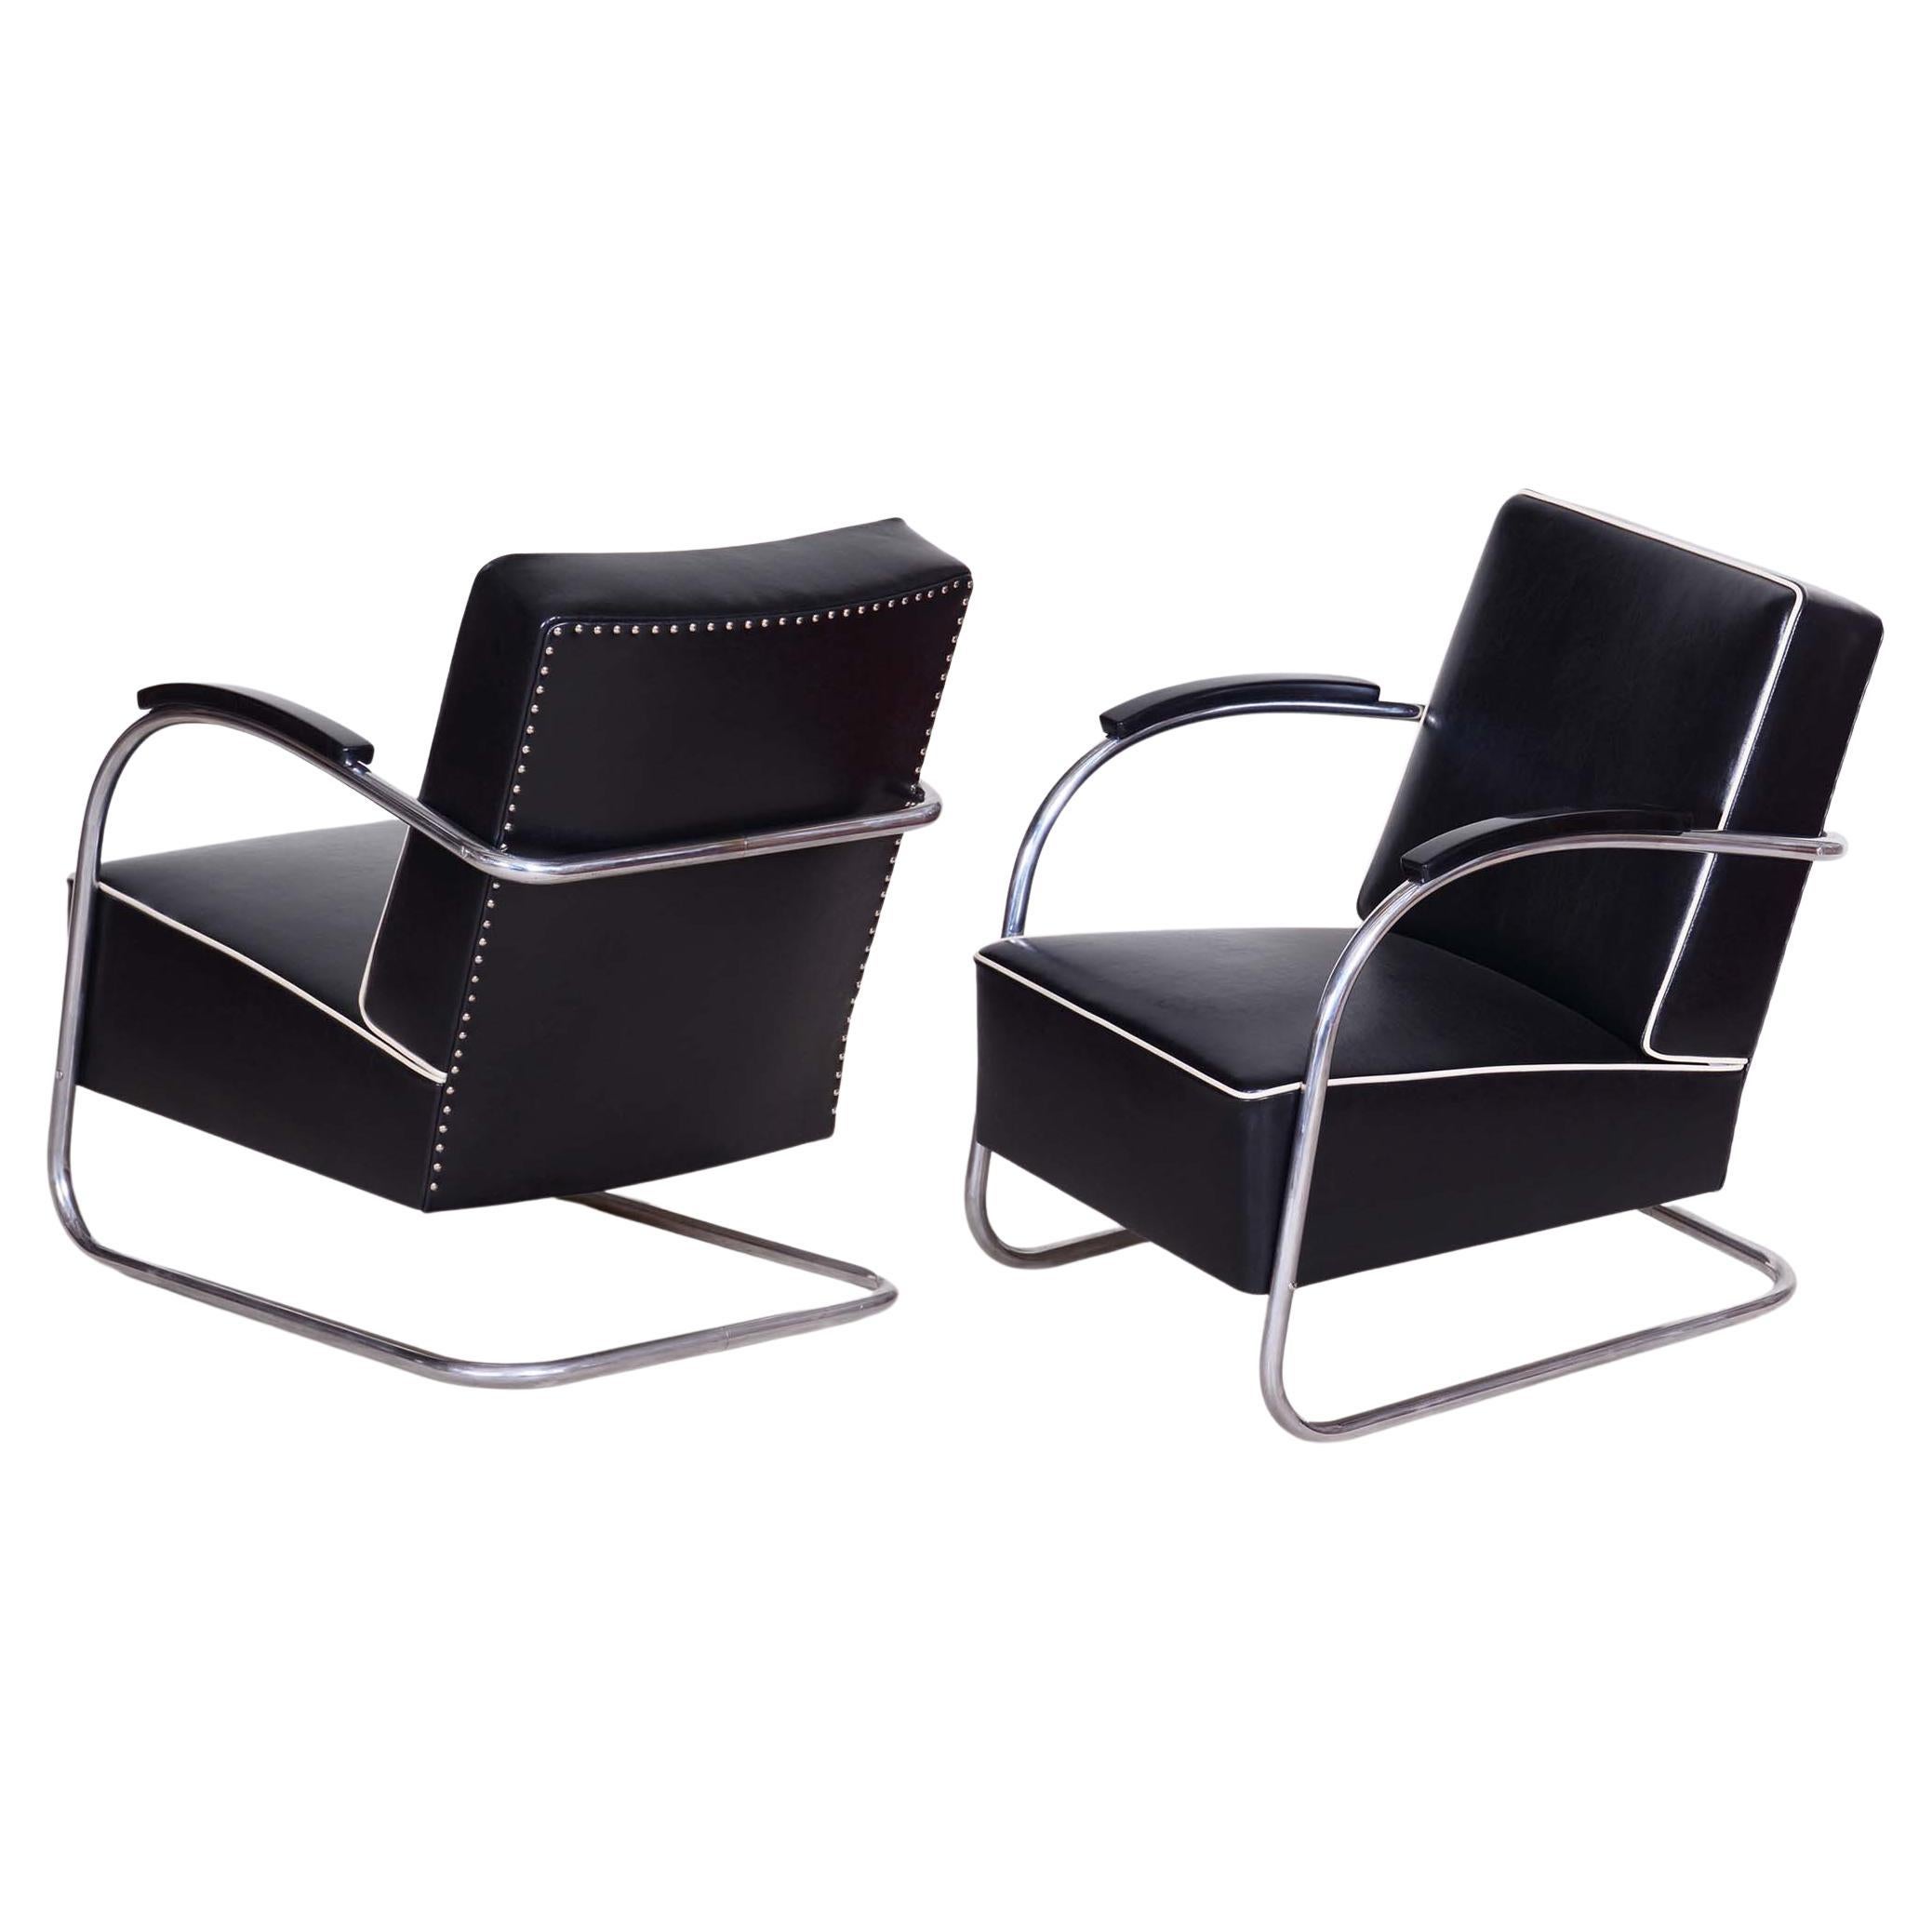 Pair of Black Bauhaus Armchairs, Made by Mucke Melder in 1930s Czechia For Sale